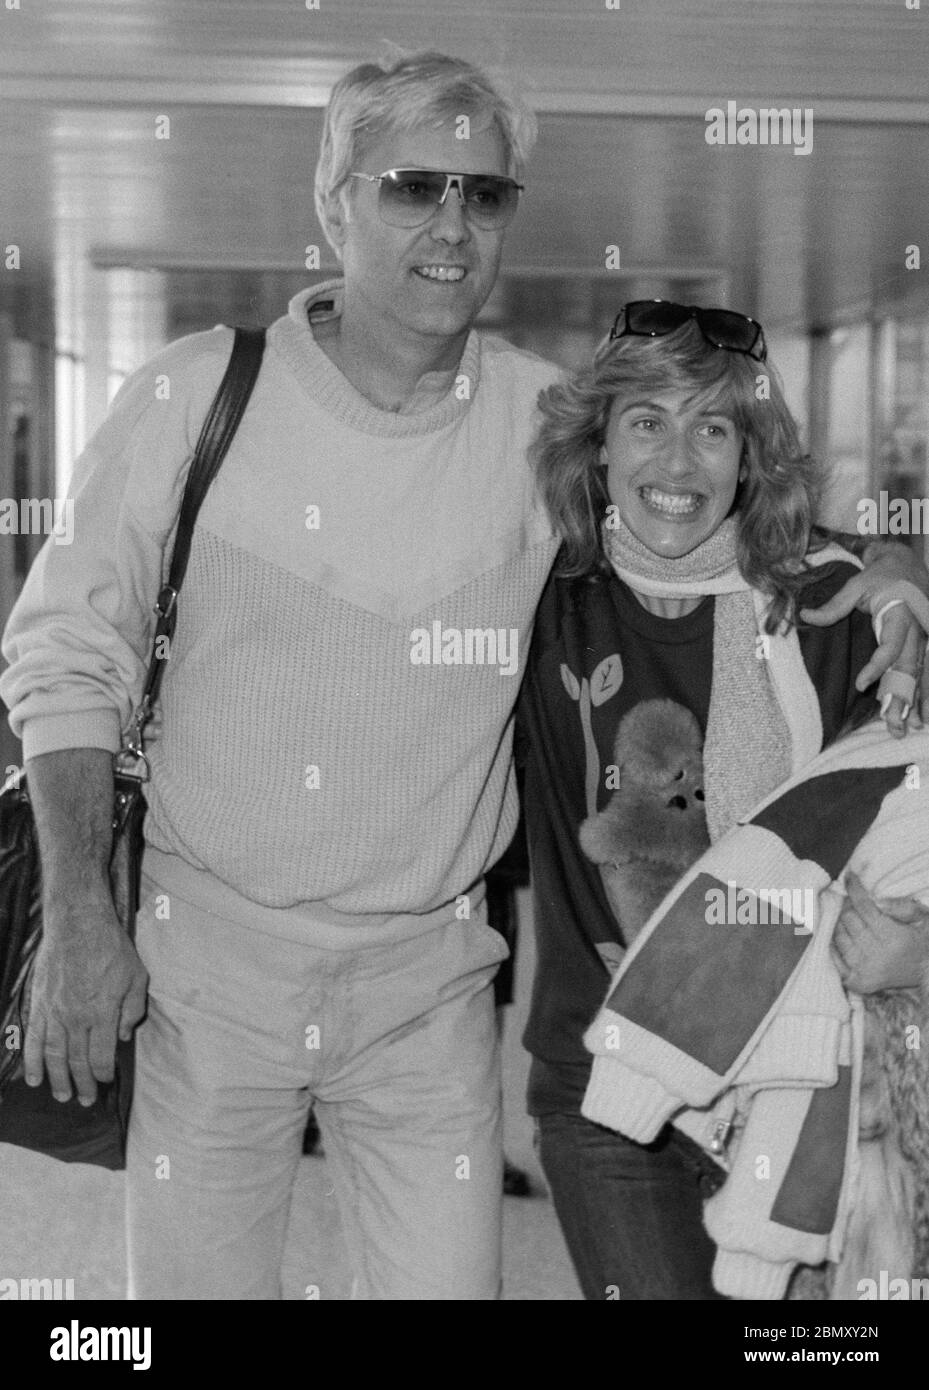 American Jazz singer Jack Jones and wife Kim Ely arriving at London's  Heathrow Airport in 1985 Stock Photo - Alamy